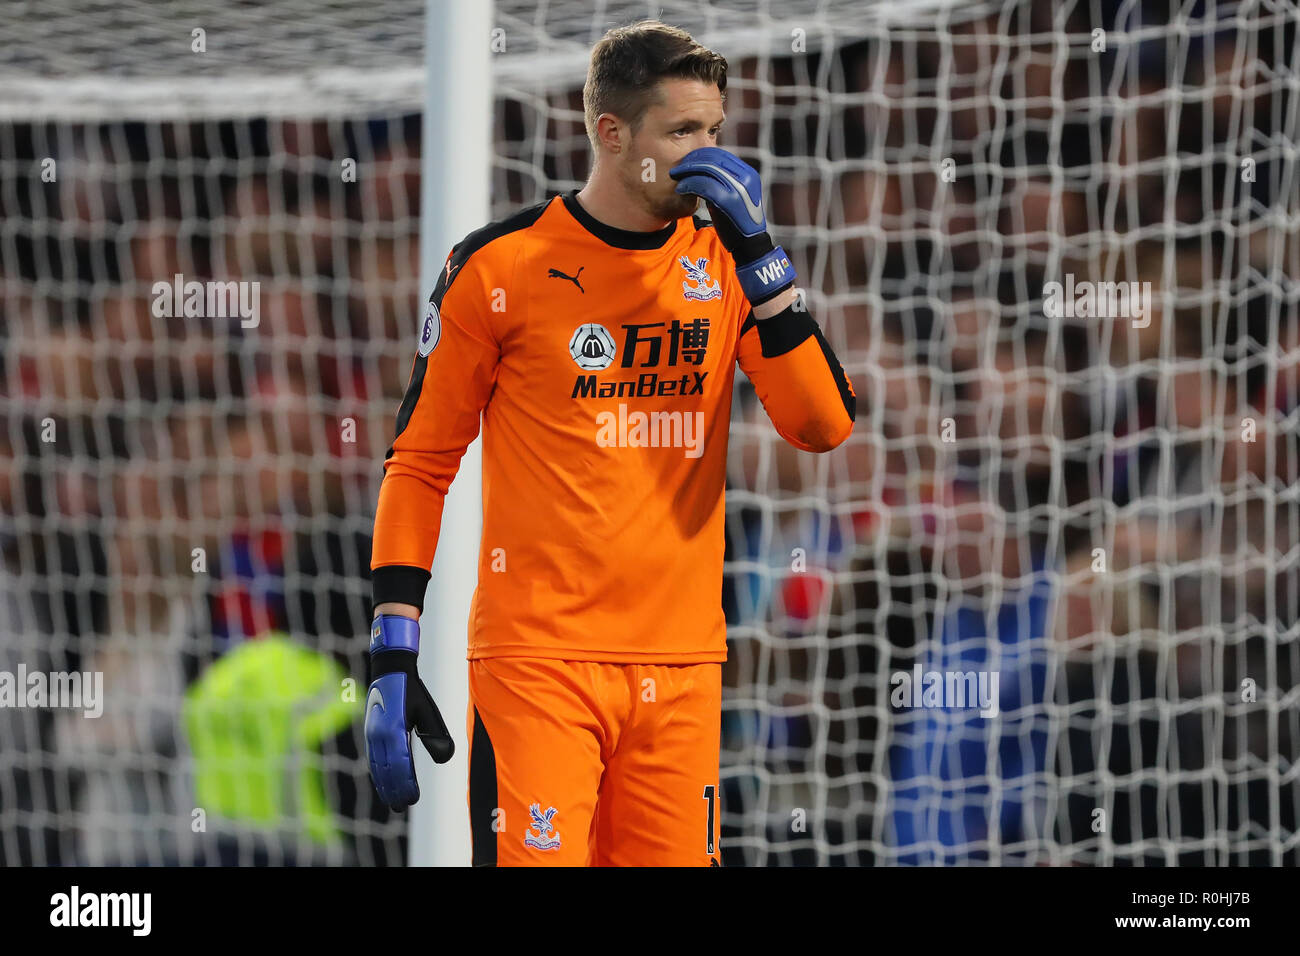 Wayne Hennessey of Crystal Palace - Chelsea v Crystal Palace, Premier League, Stamford Bridge, London - 4th November 2018  STRICTLY EDITORIAL USE ONLY - DataCo rules apply - The use of this image in a commercial context is strictly prohibited unless express permission has been given by the club(s) concerned. Examples of commercial usage include, but are not limited to, use in betting and gaming, marketing and advertising products. No use with unauthorised audio, video, data, fixture lists, club and or league logos or services including those listed as 'live' Stock Photo